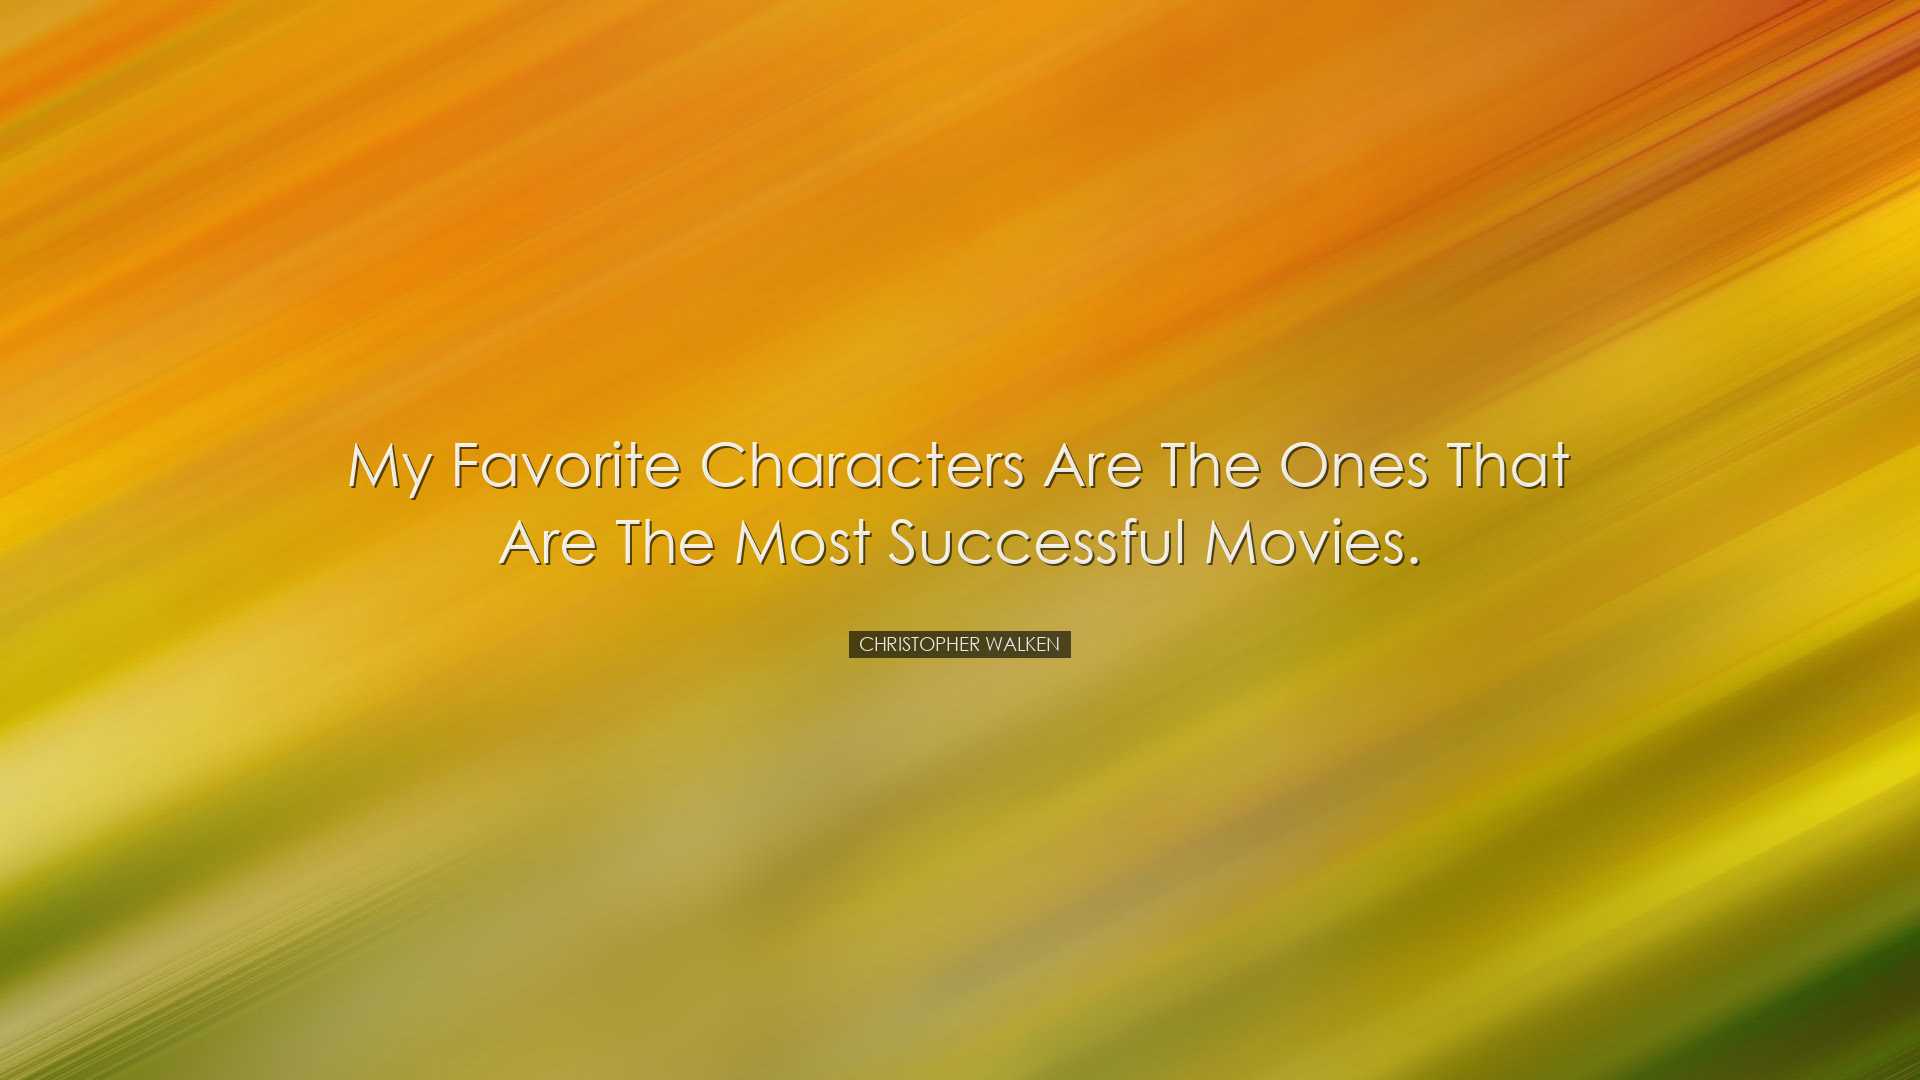 My favorite characters are the ones that are the most successful m